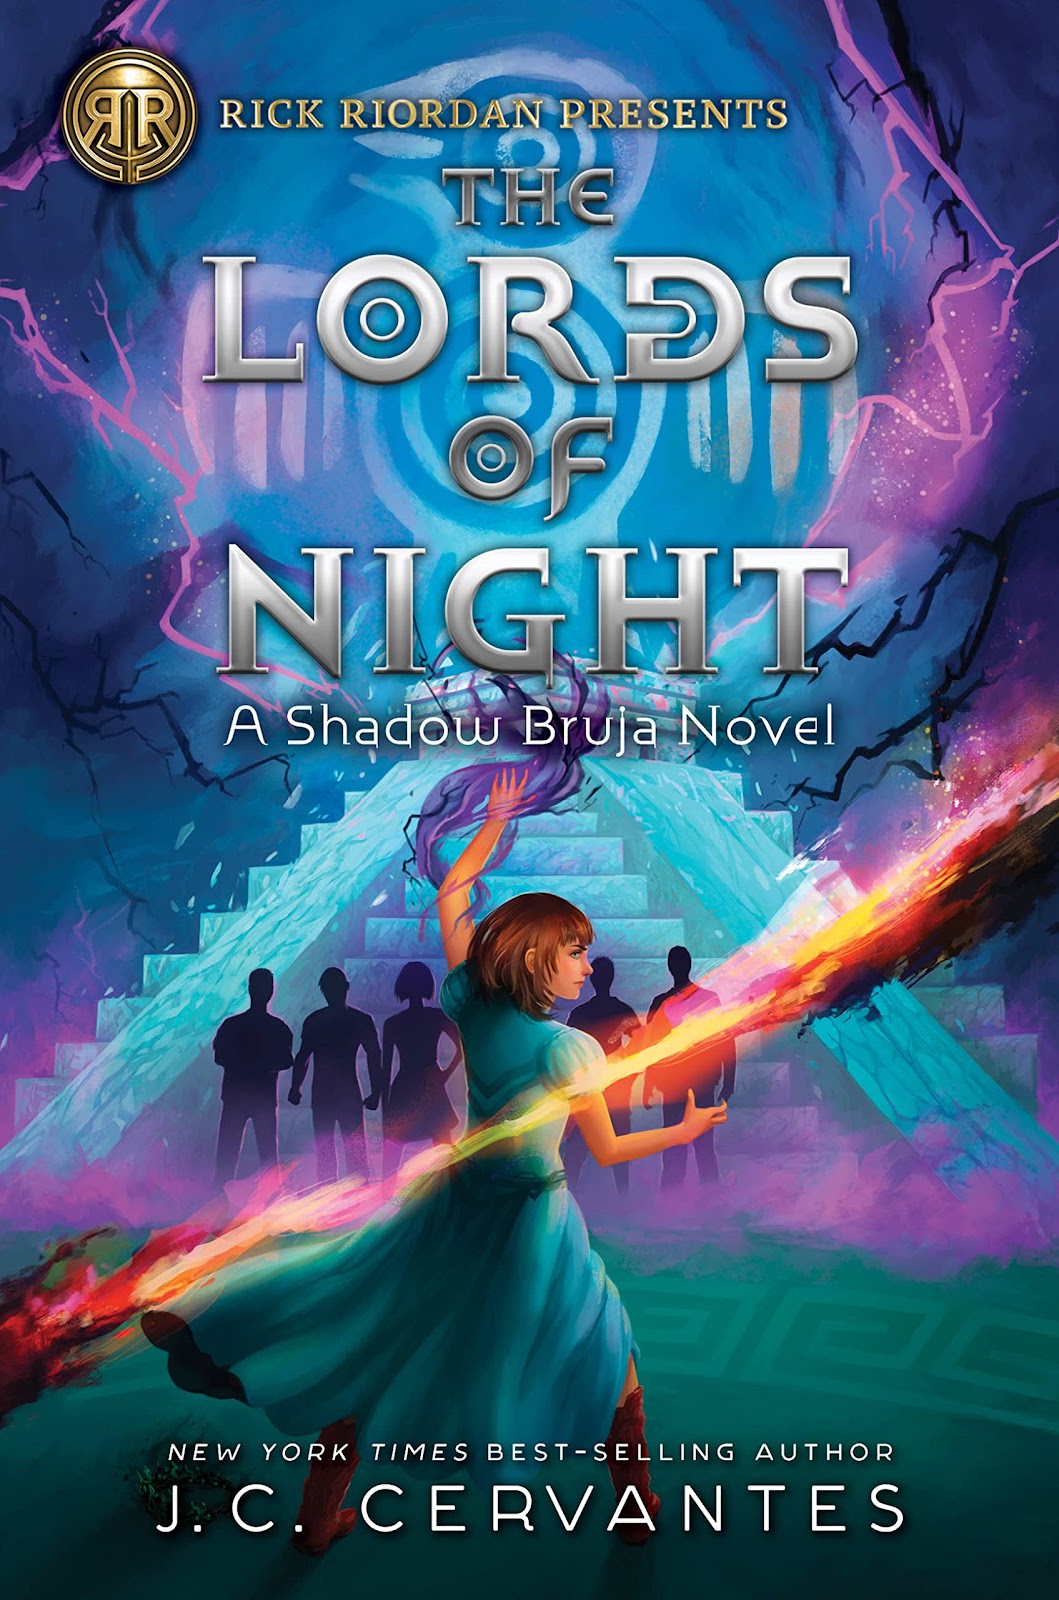 The Lords of Night by J.C. Cervantes